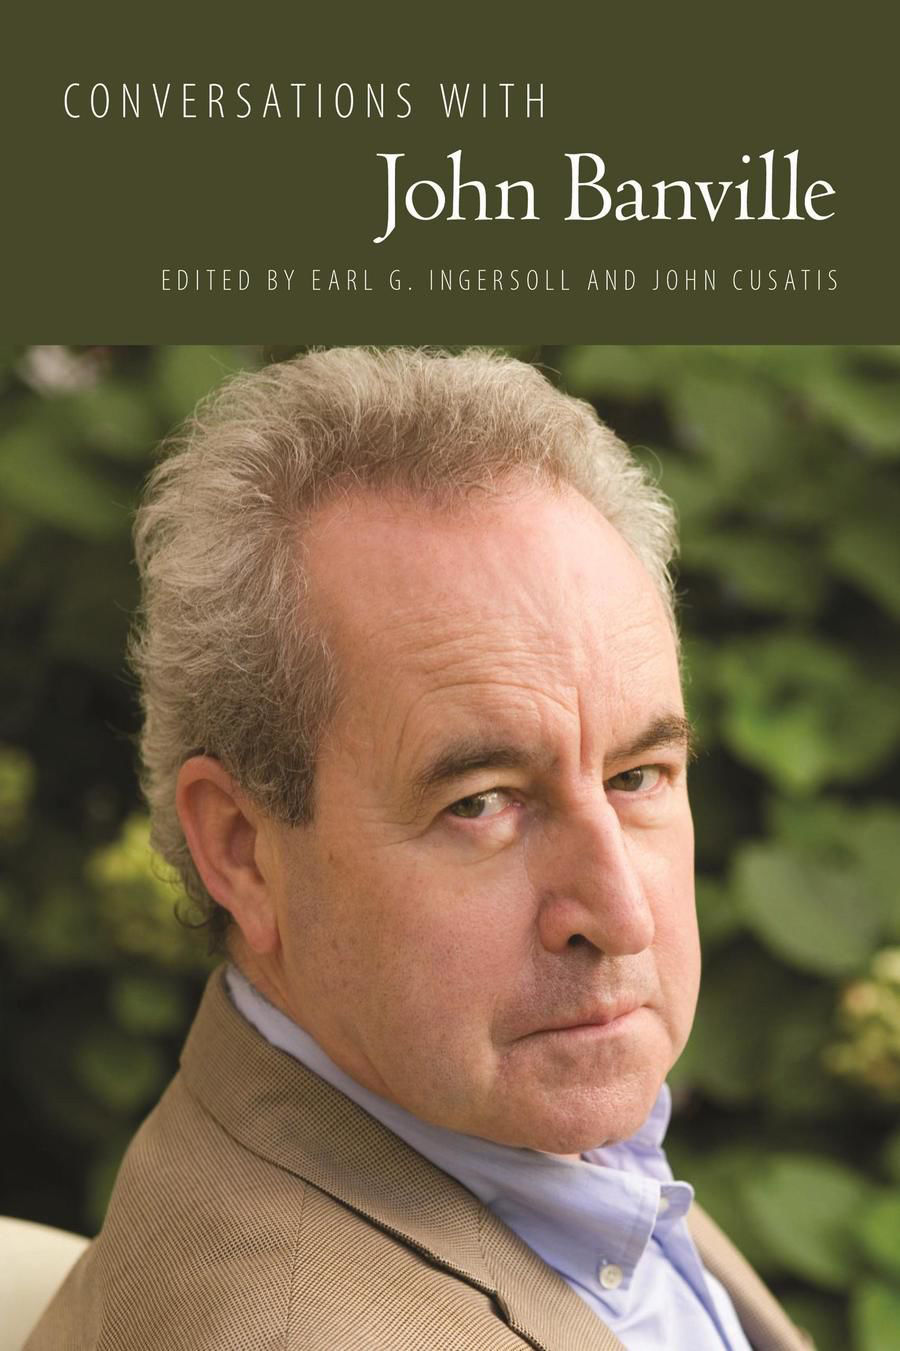 Happenings John Banville subject of new book; MUSC student publishes